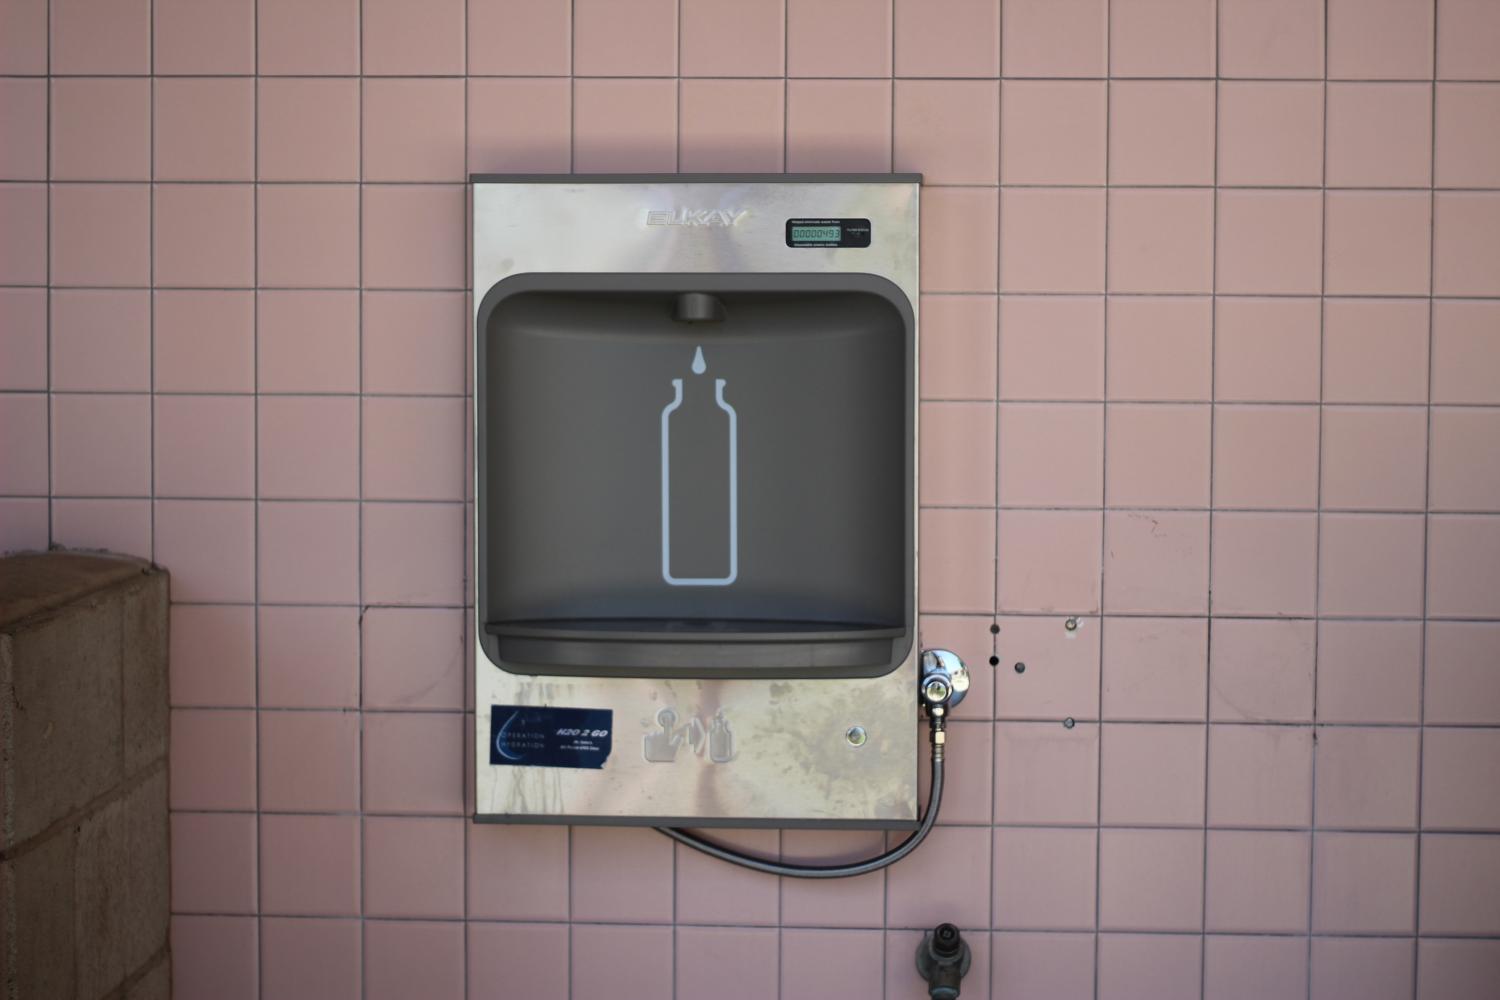 The+water+dispenser+was+created+with+a+goal+of+reducing+plastic+waste.